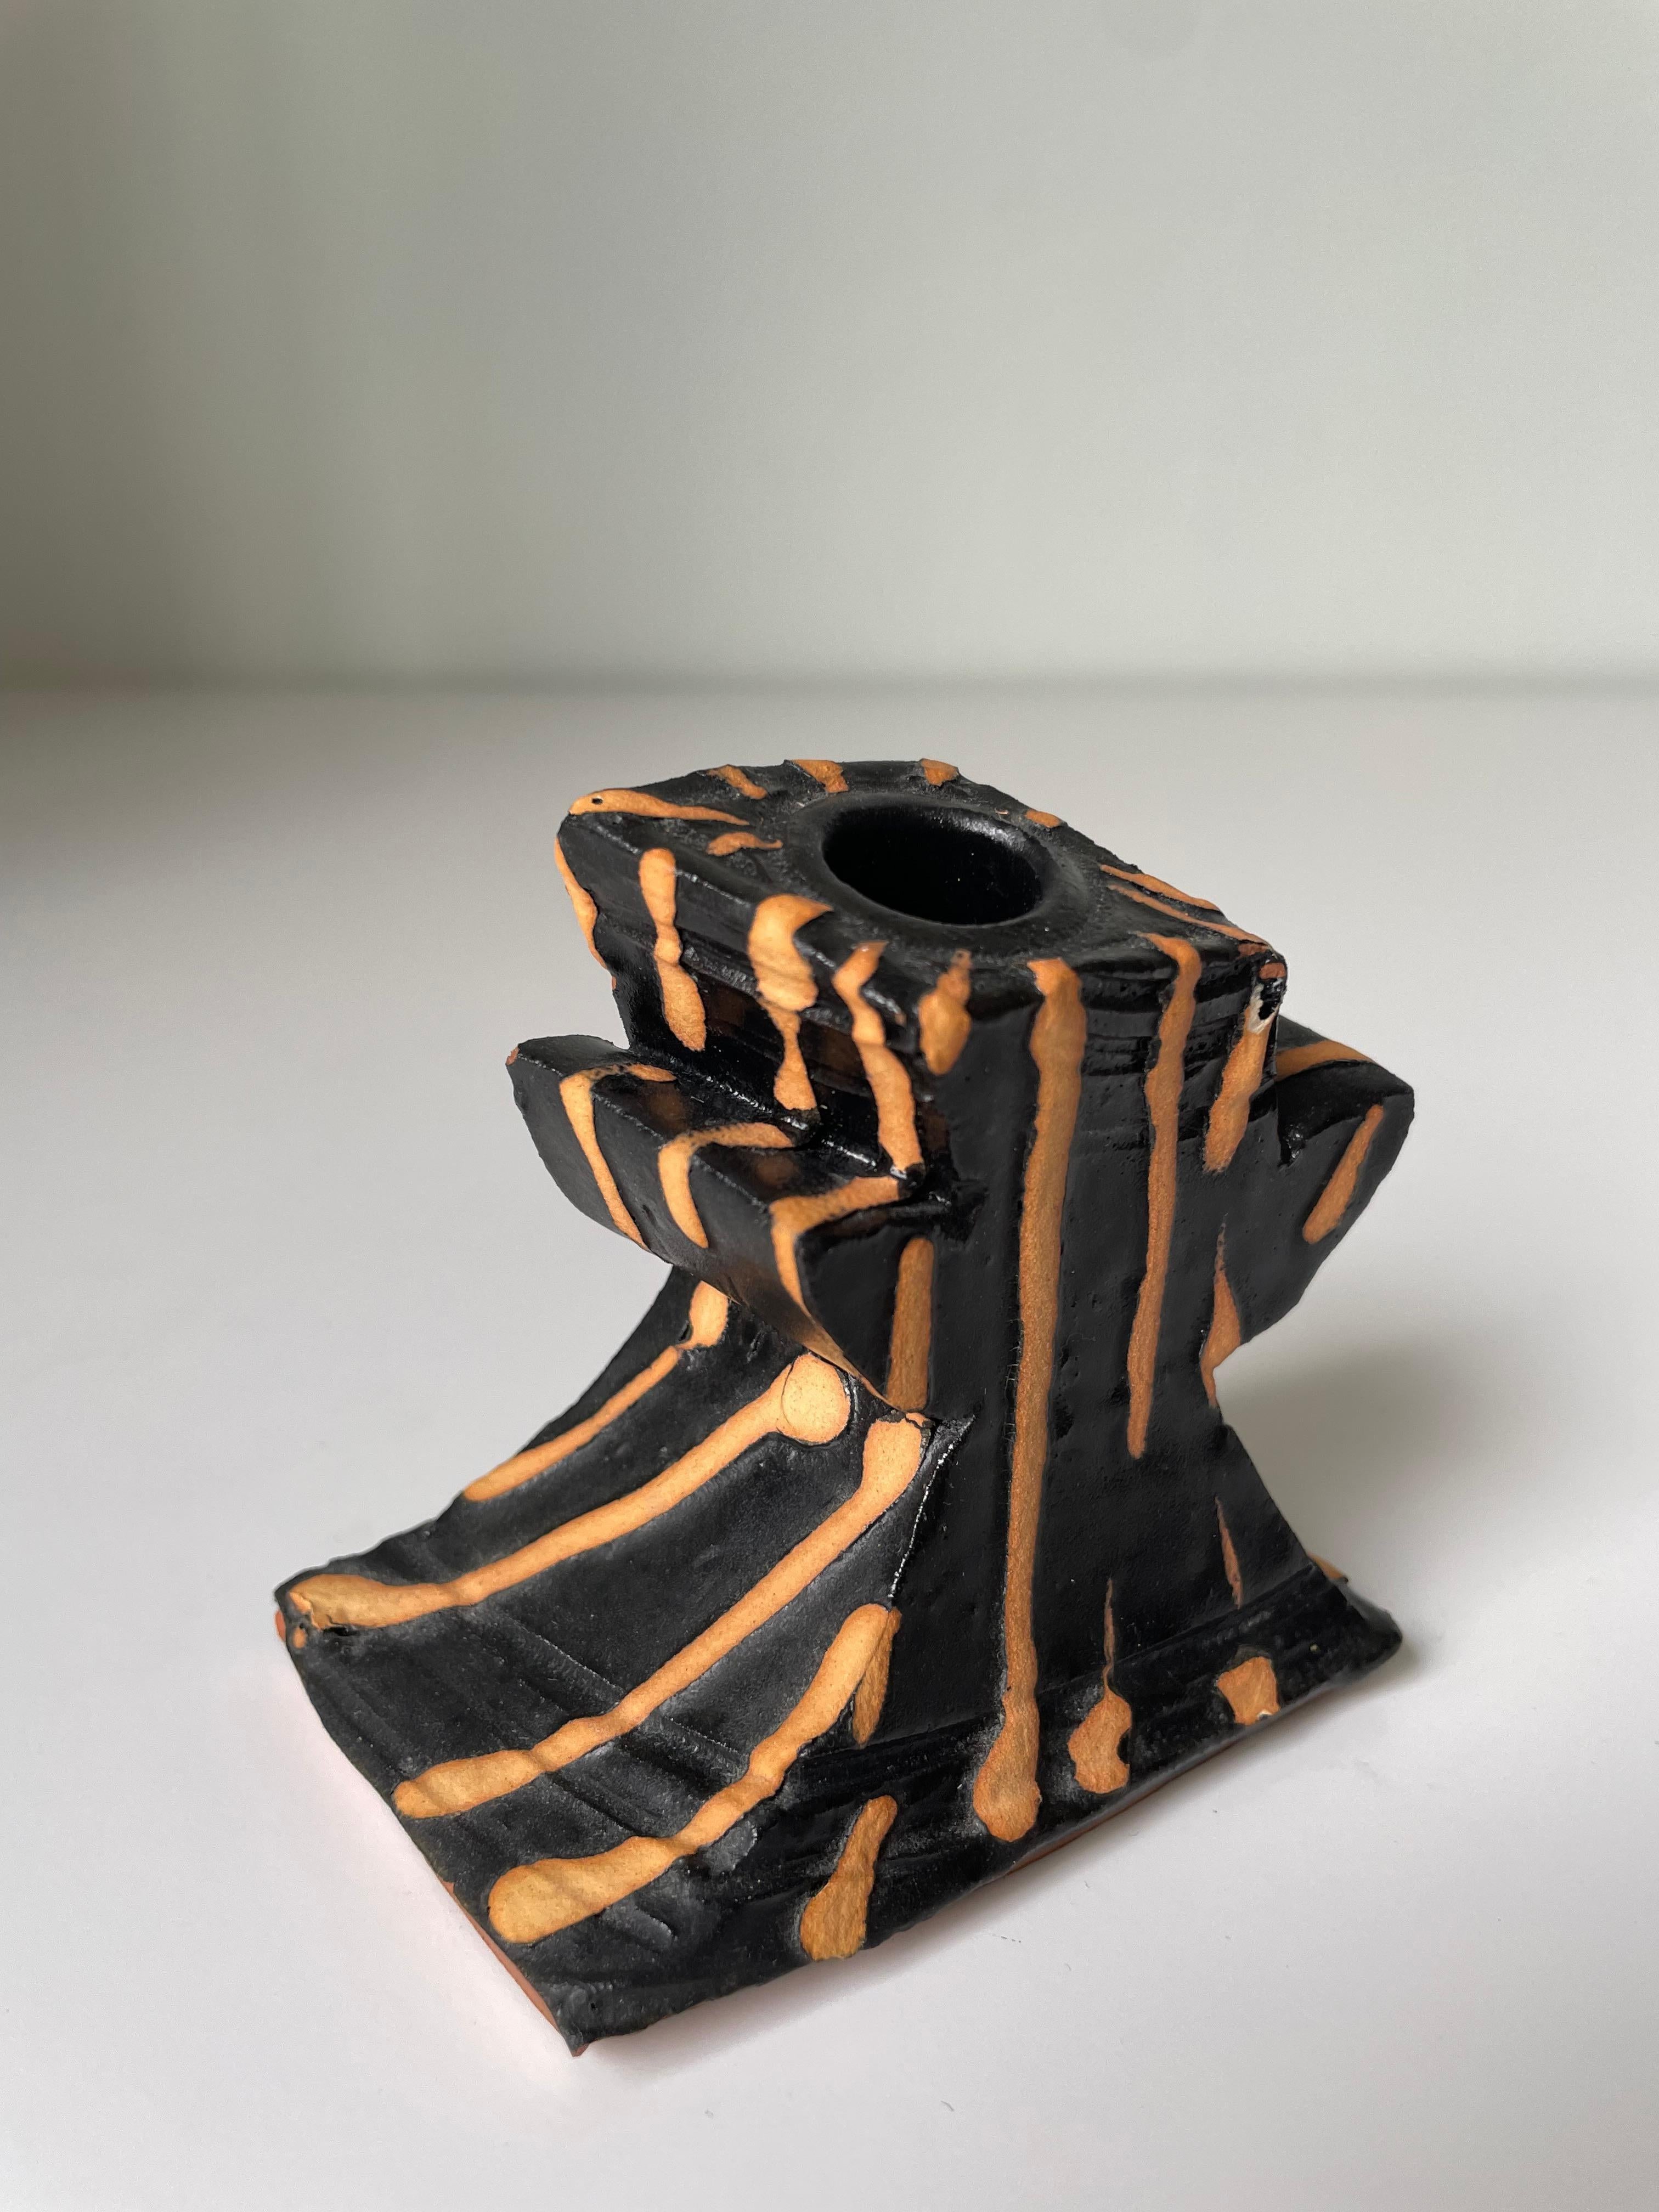 Sculptural organic modern black ceramic art candlestick or small vase with thick terracotta peach colored stripes. Winding body with two short “arms” and asymmetrical base. Handmade by the award-winning artist Richard Parker, one of New Zealand's